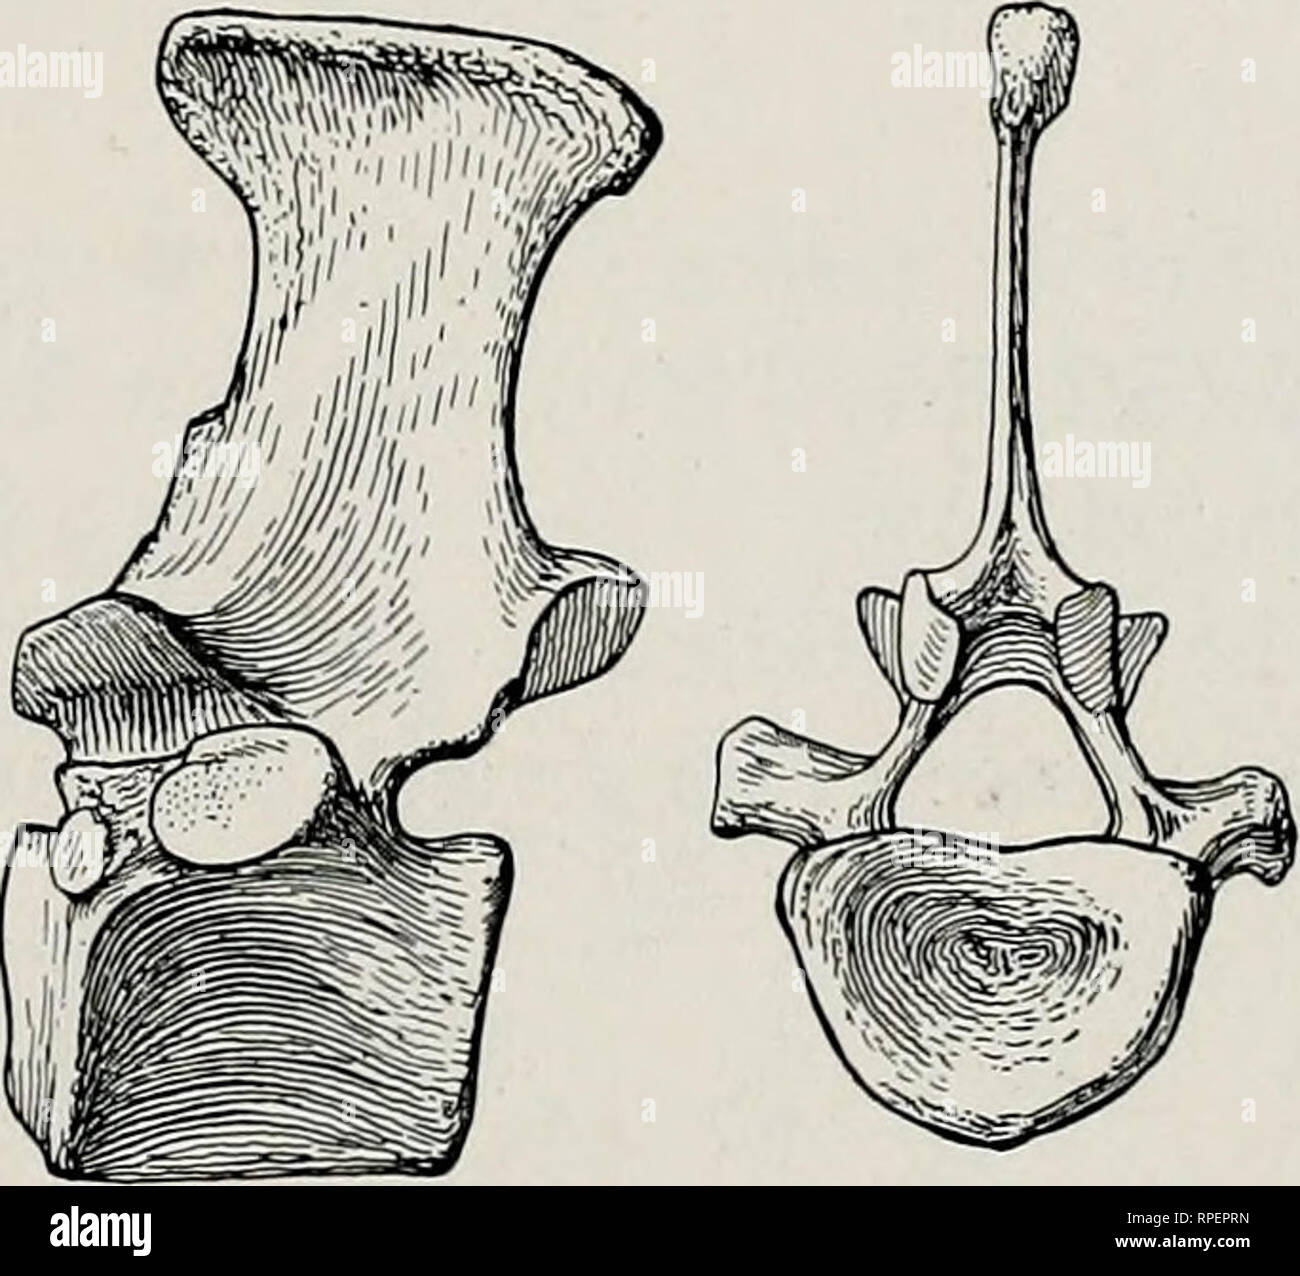 . The American diceratheres. Rhinoceroses, Fossil; Paleontology. Fig. 23. Fie, 24. Fig. 23. Diceratherium cooki Peterson. No. 2499, Coll. Carnegie Museum. Lateral and posterior views of tenth dorsal. X j. Fig. 24. Diceratherium cooki Peterson. No. 2470a, Coll. Carnegie Museum. Lateral and posterior views of eighteenth dorsal. X h In the neighborhood of the eighth, ninth, and tenth dorsals there is usually a fora- men formed at this notch, which is characteristic of all posterior dorsals except the last. (See Figs. 23-24.) The fourteenth and fifteenth dorsals have the neural spines broader and  Stock Photo